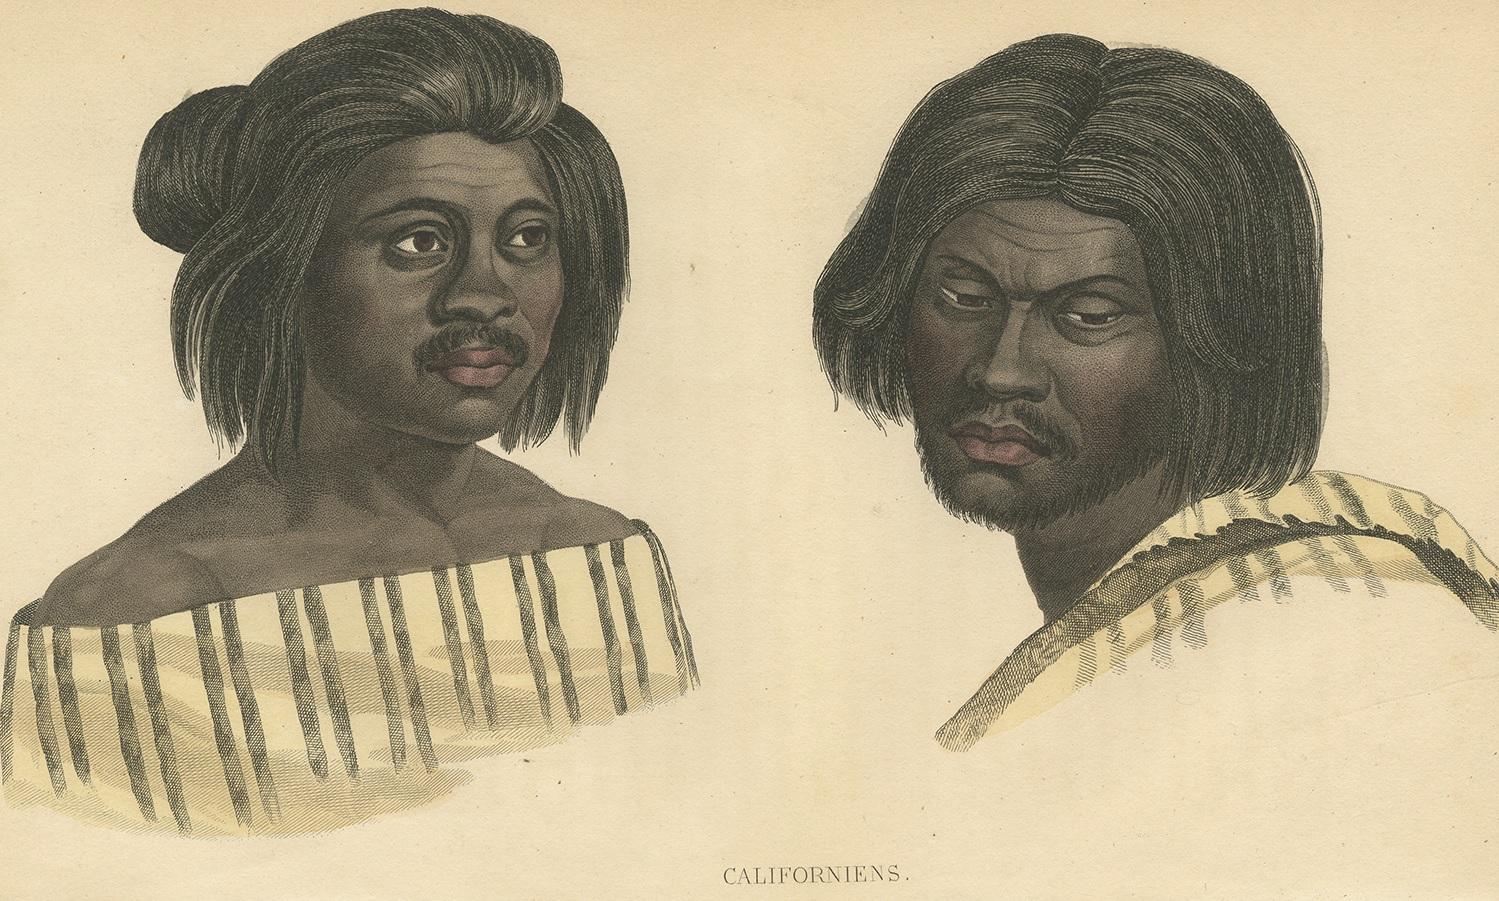 Antique print titled 'Californiens'. Lithograph of Native Californians, the indigenous inhabitants who have lived or currently live in the geographic area within the current boundaries of California before and after the arrival of Europeans. This